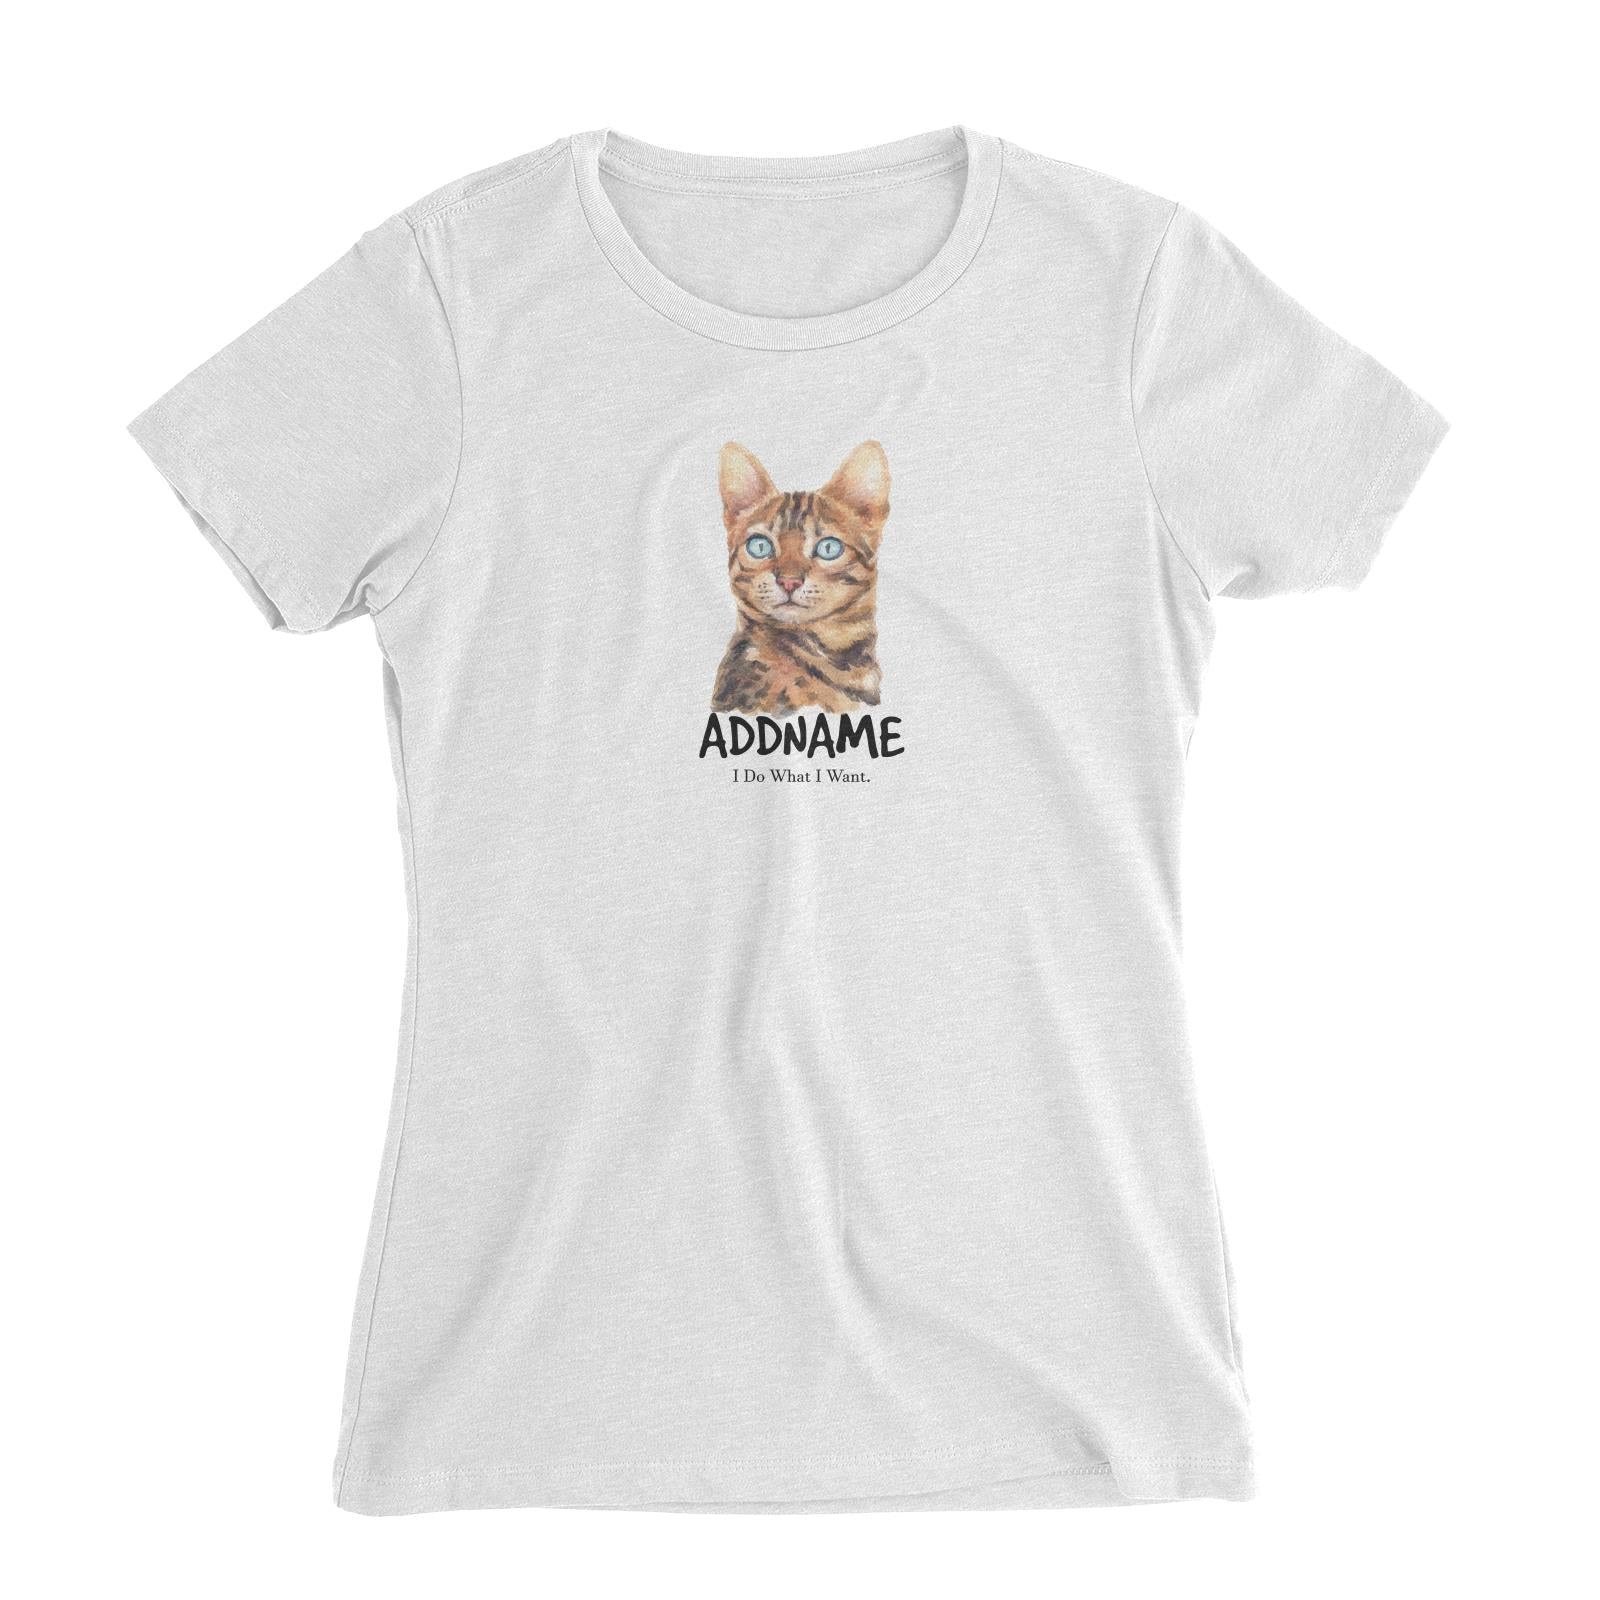 Watercolor Cat Bengal Cat I Do What I Want Addname Women's Slim Fit T-Shirt